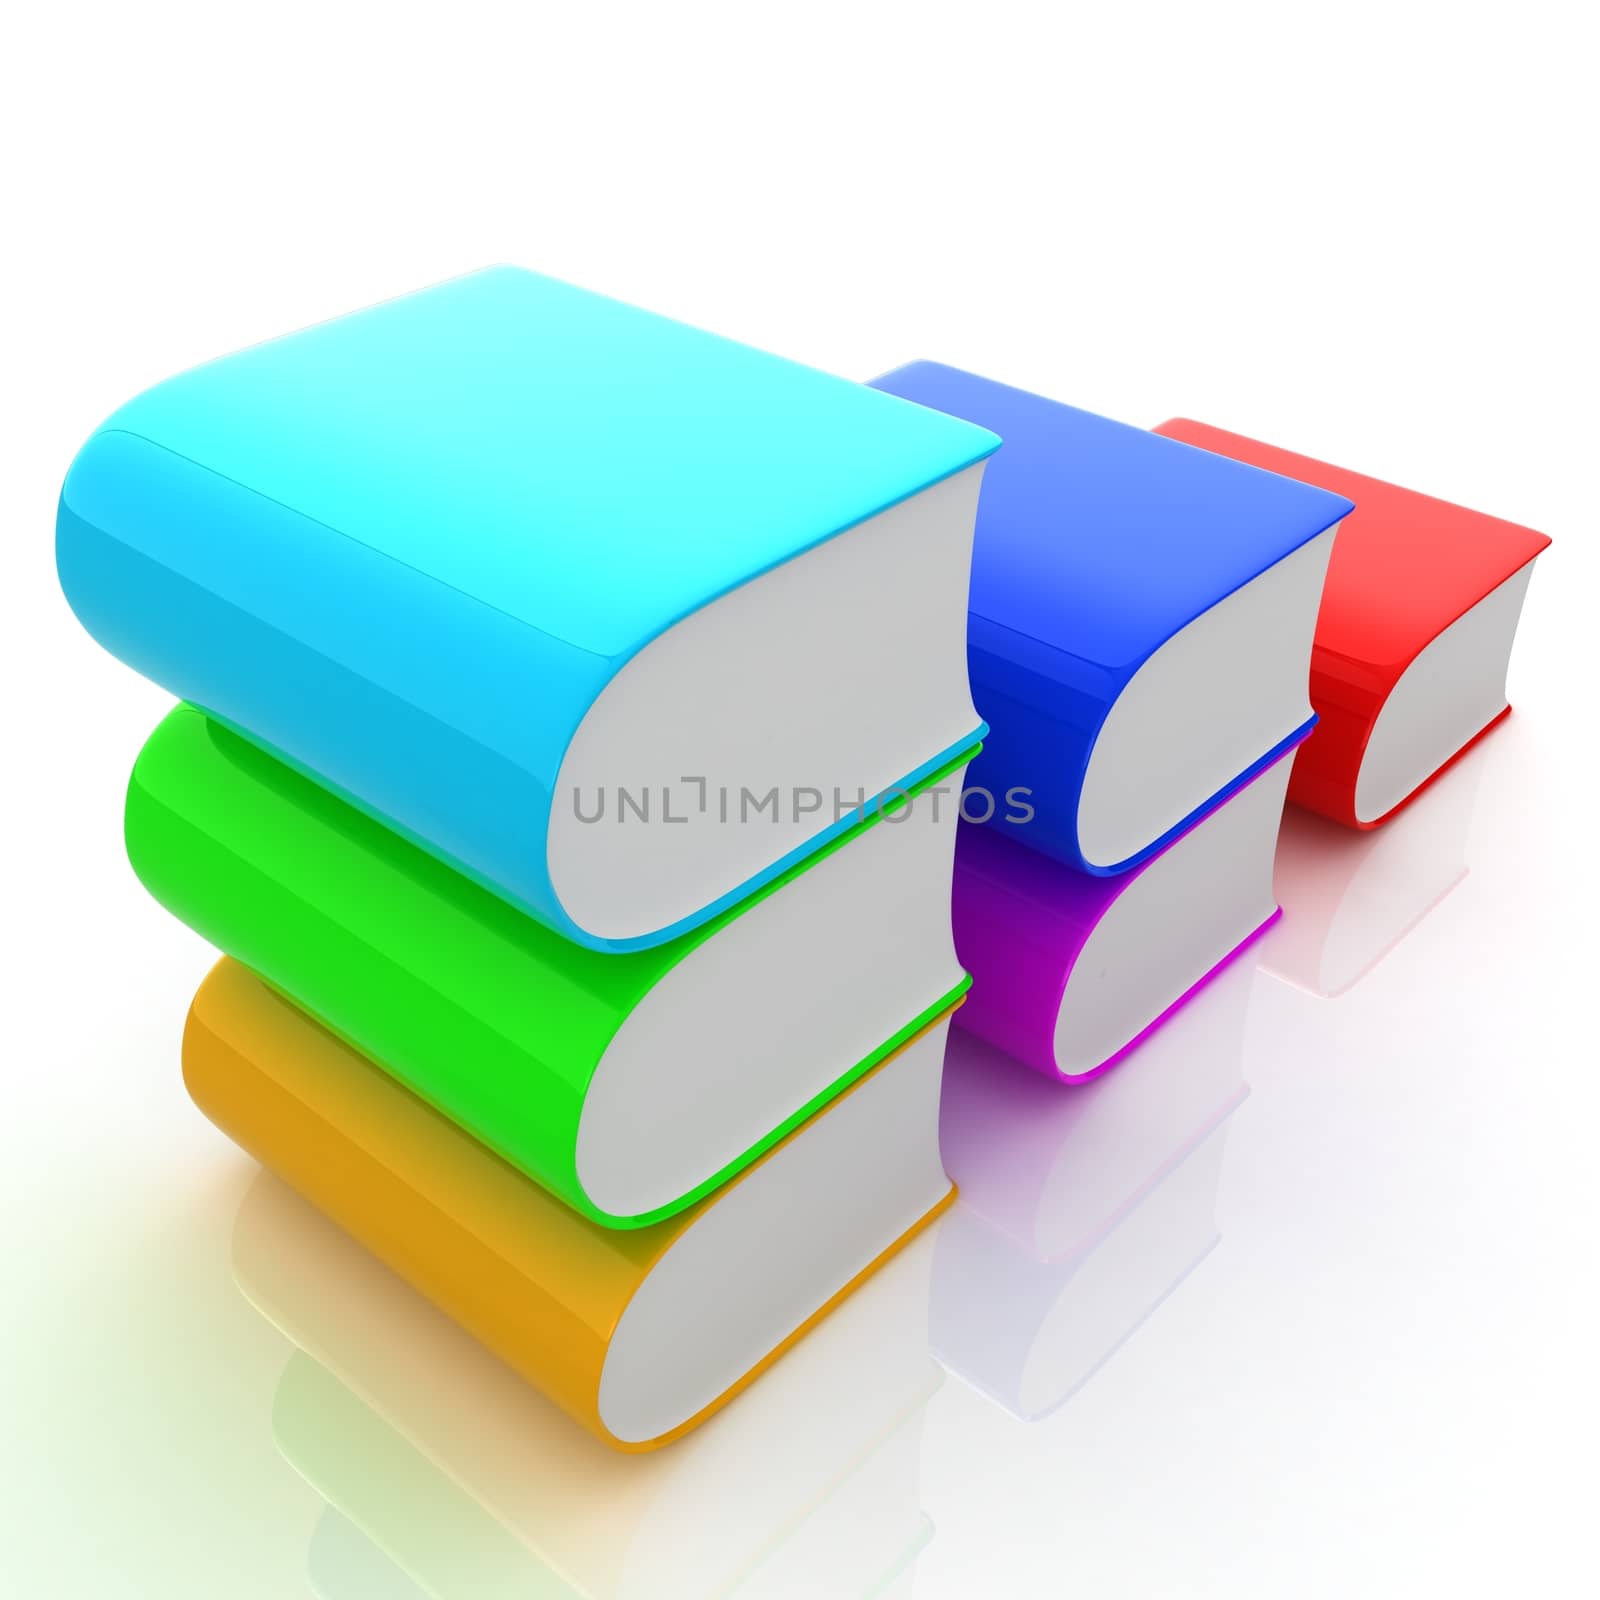 Glossy Books Icon isolated on a white background by Guru3D